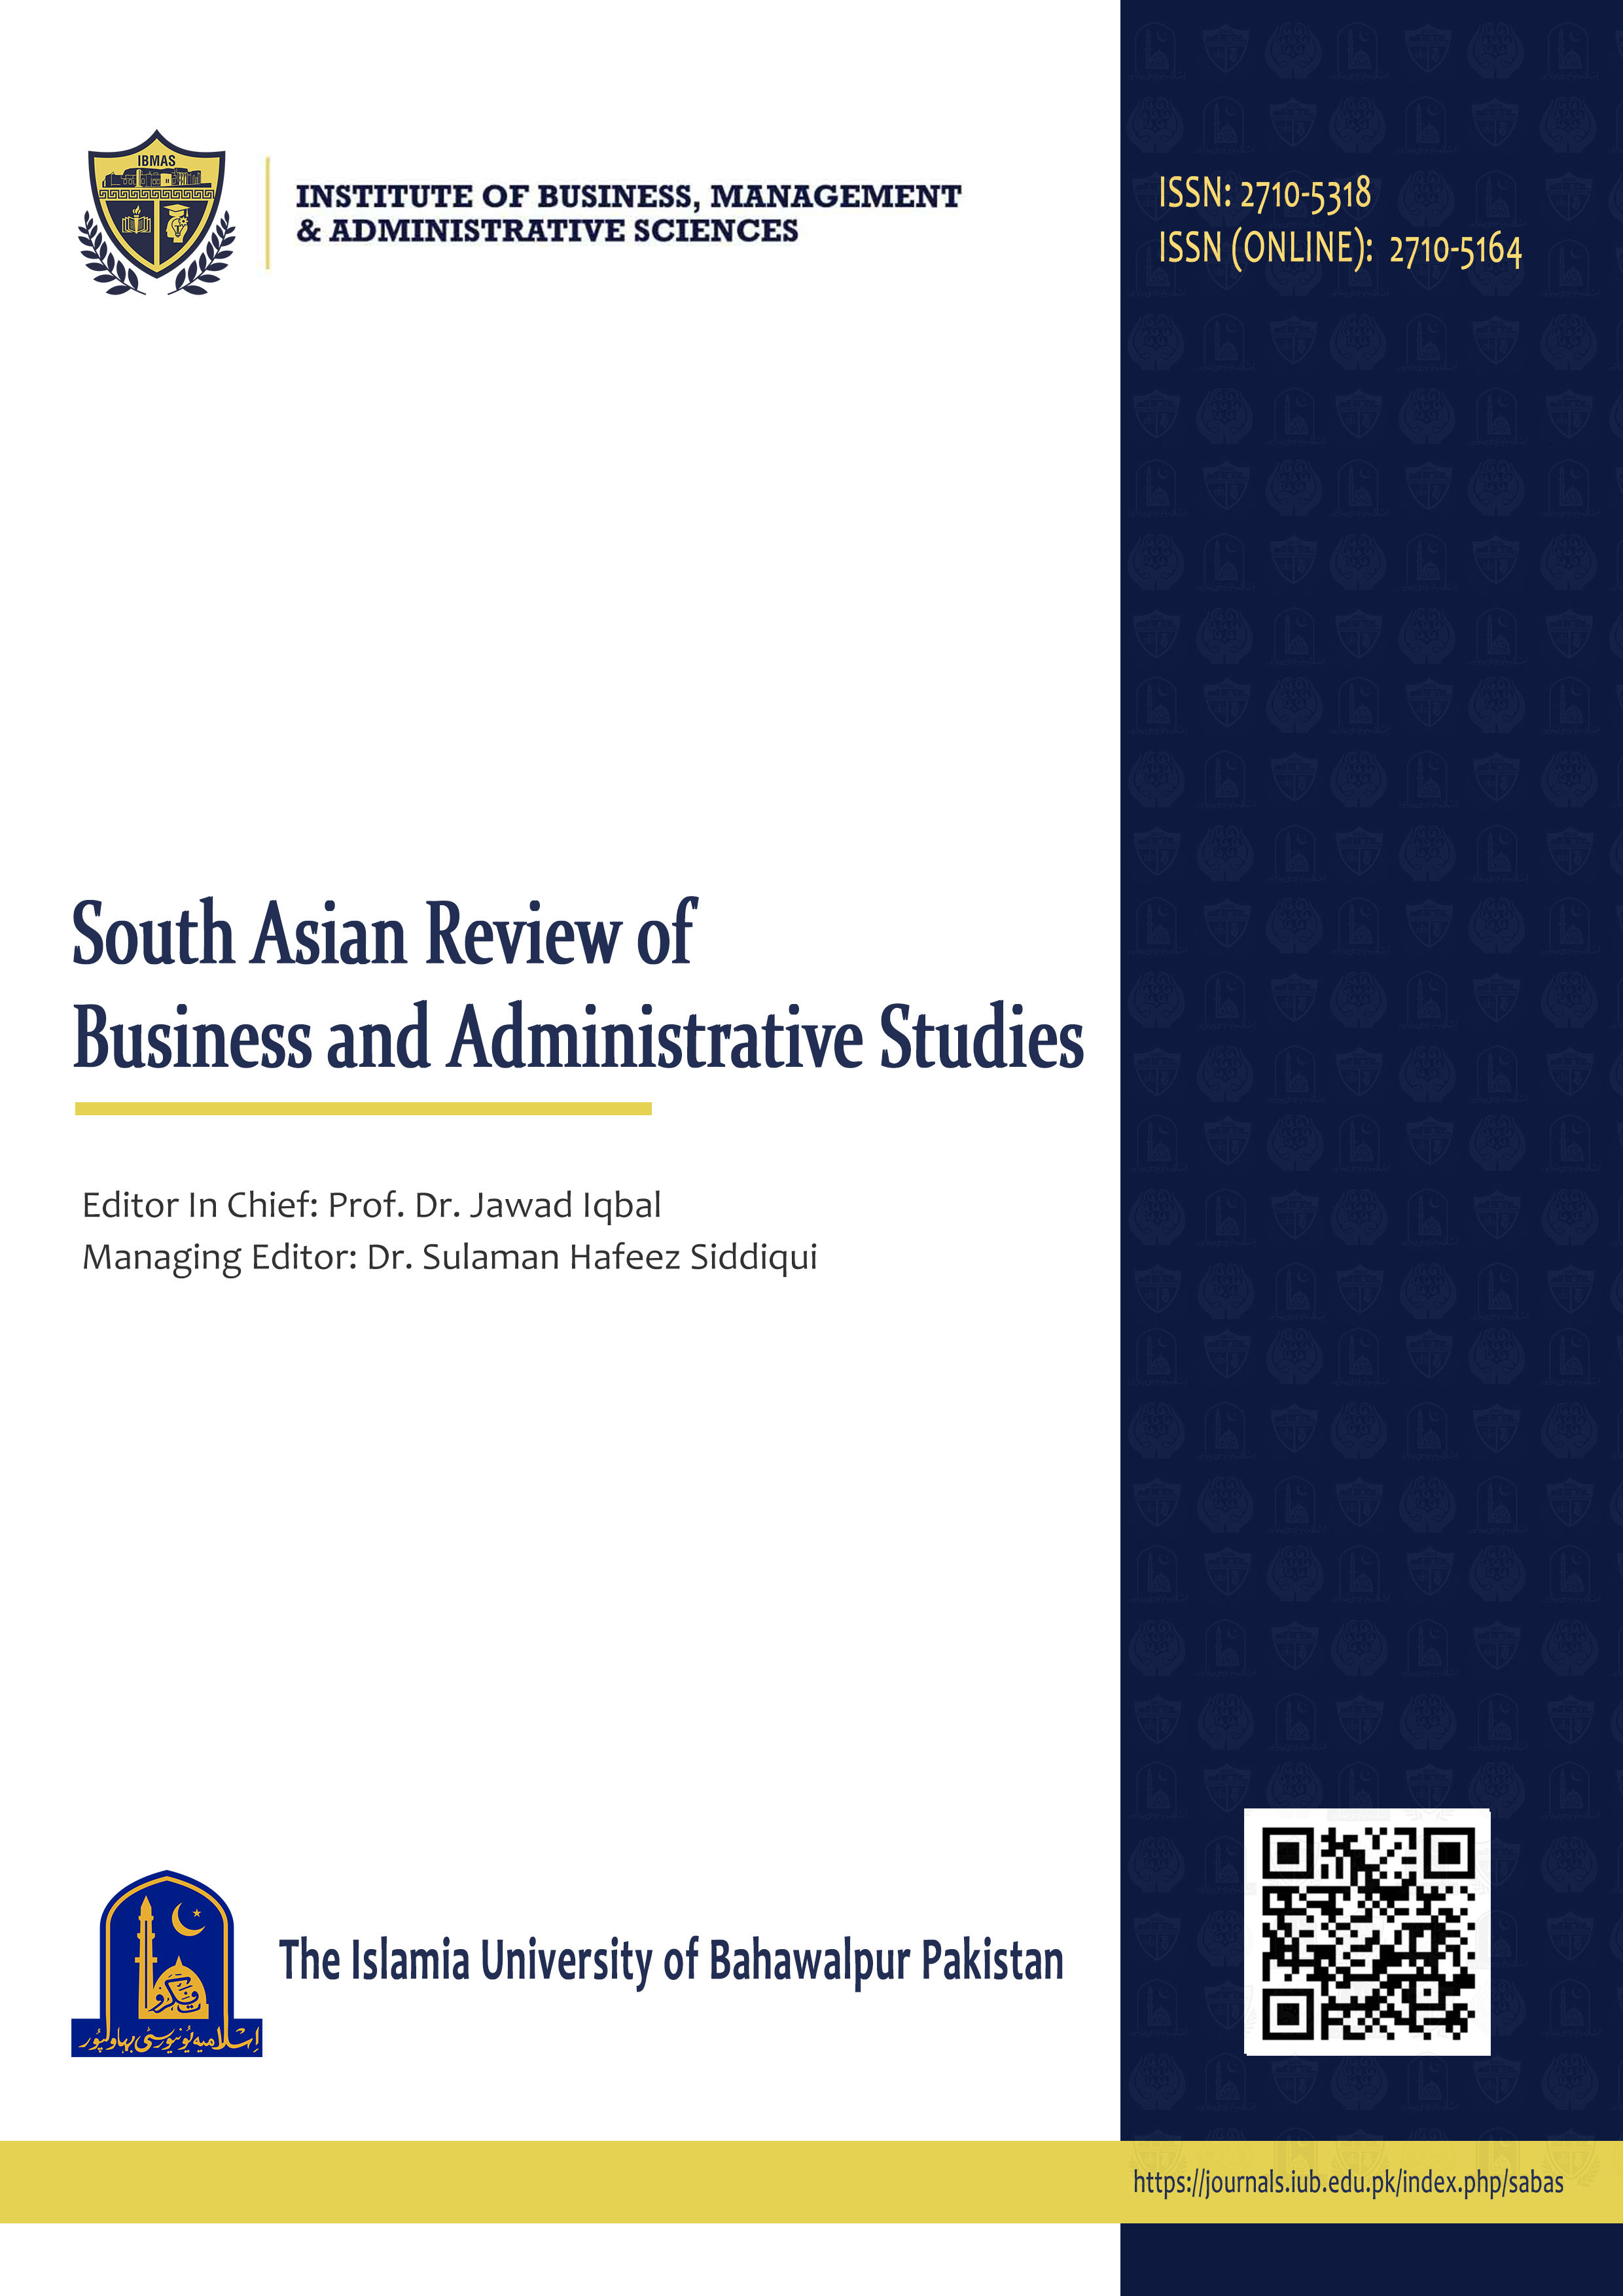 South Asian Review of Business and Administrative Studies (SABAS)